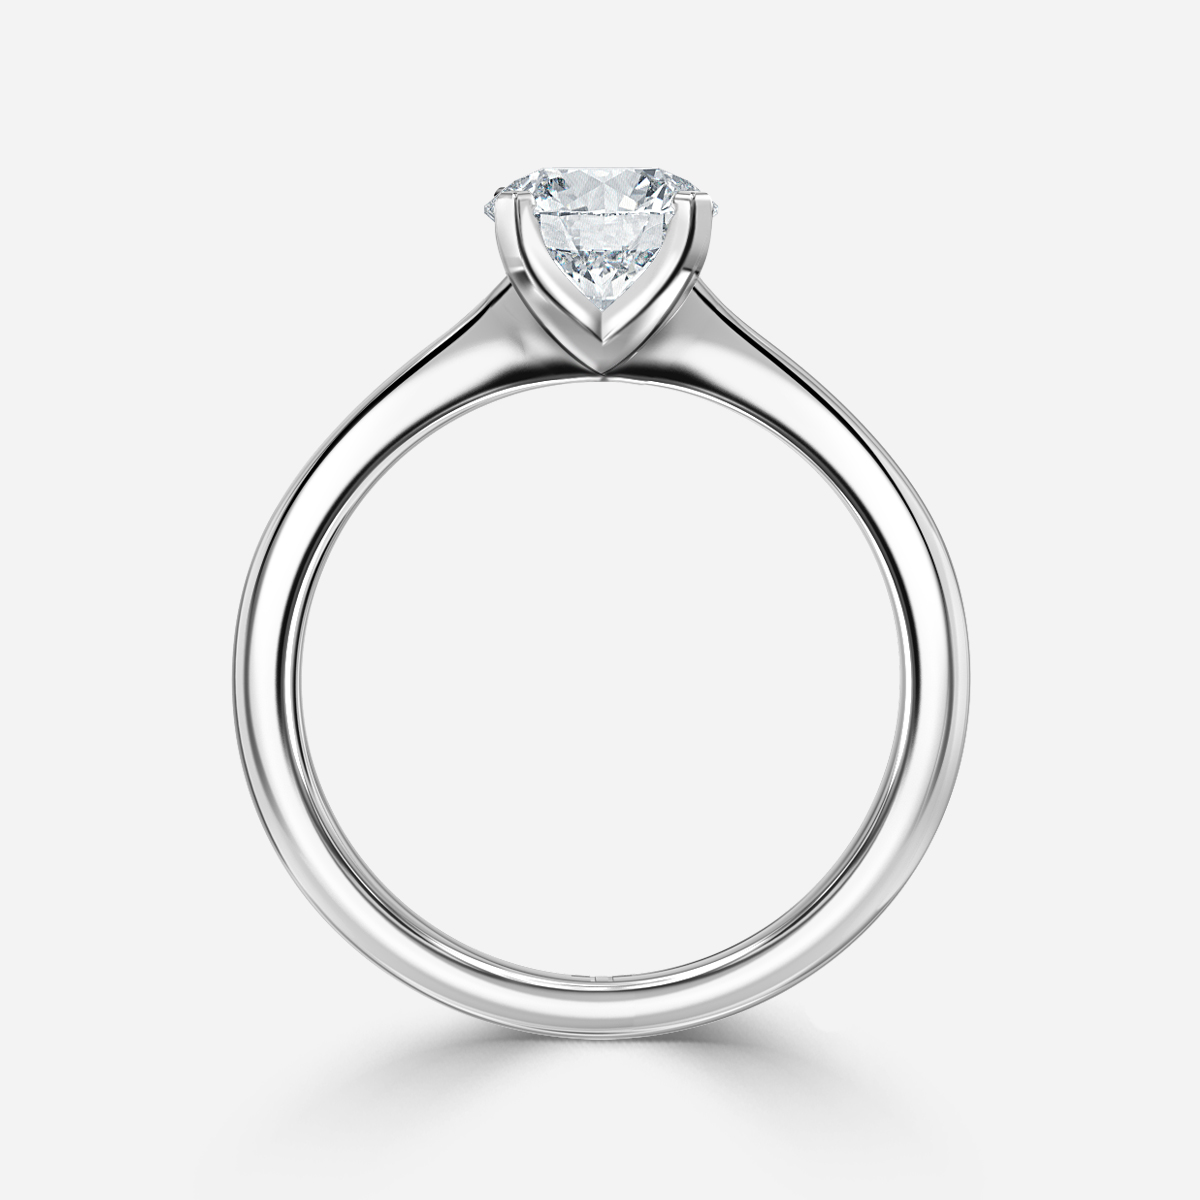 Firefly White Gold Solitaire Engagement Ring